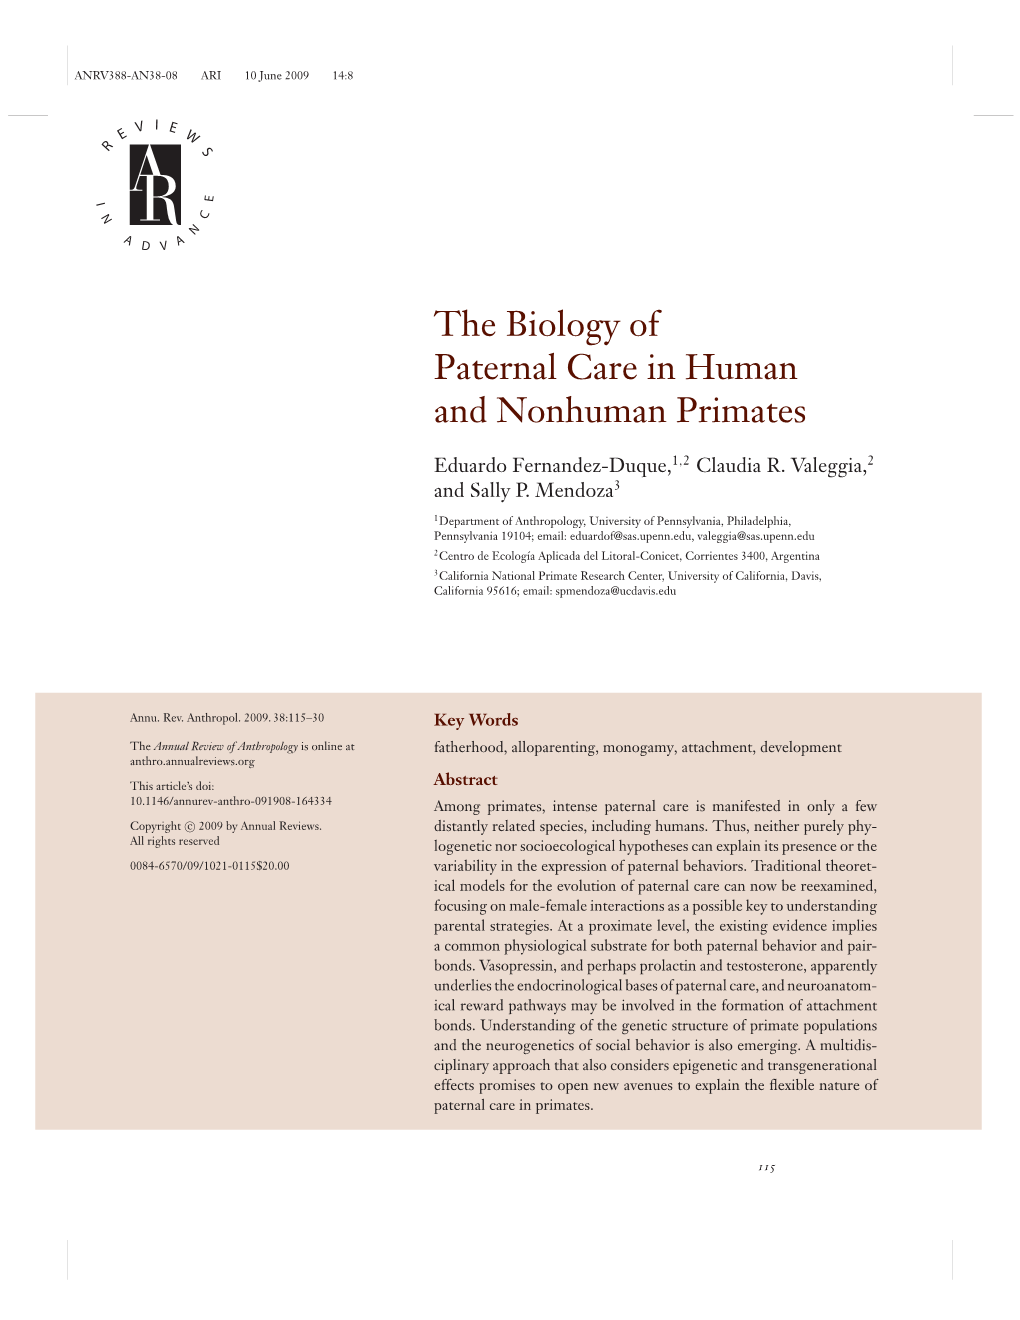 The Biology of Paternal Care in Human and Nonhuman Primates